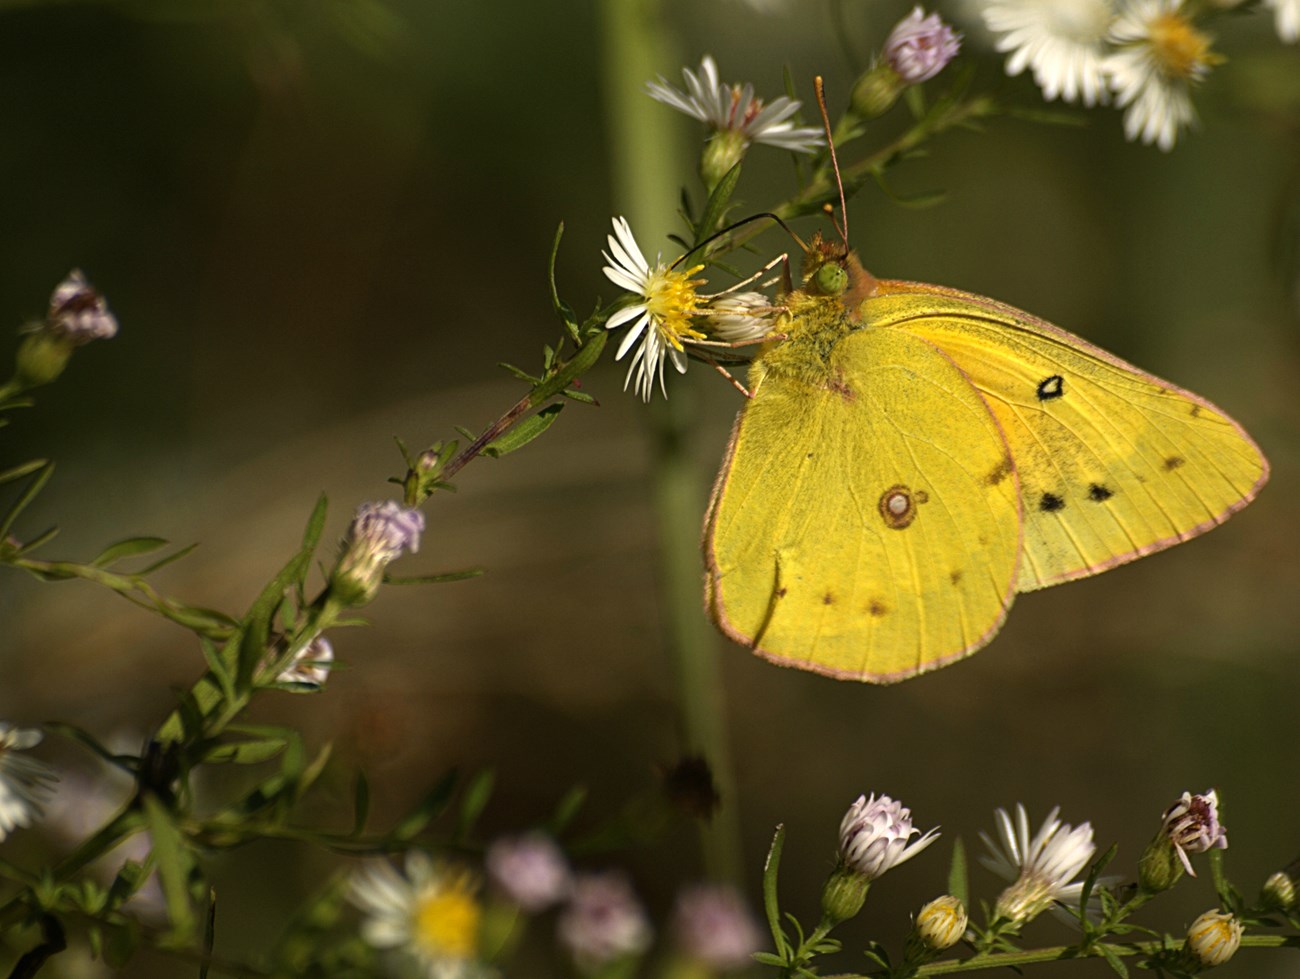 A bright yellow butterfly with a lime green eye hangs on a stalk with many small, white flowers. Its long tongue probes the flower’s yellow center. The butterfly’s wing has about a dozen black and rust spots.